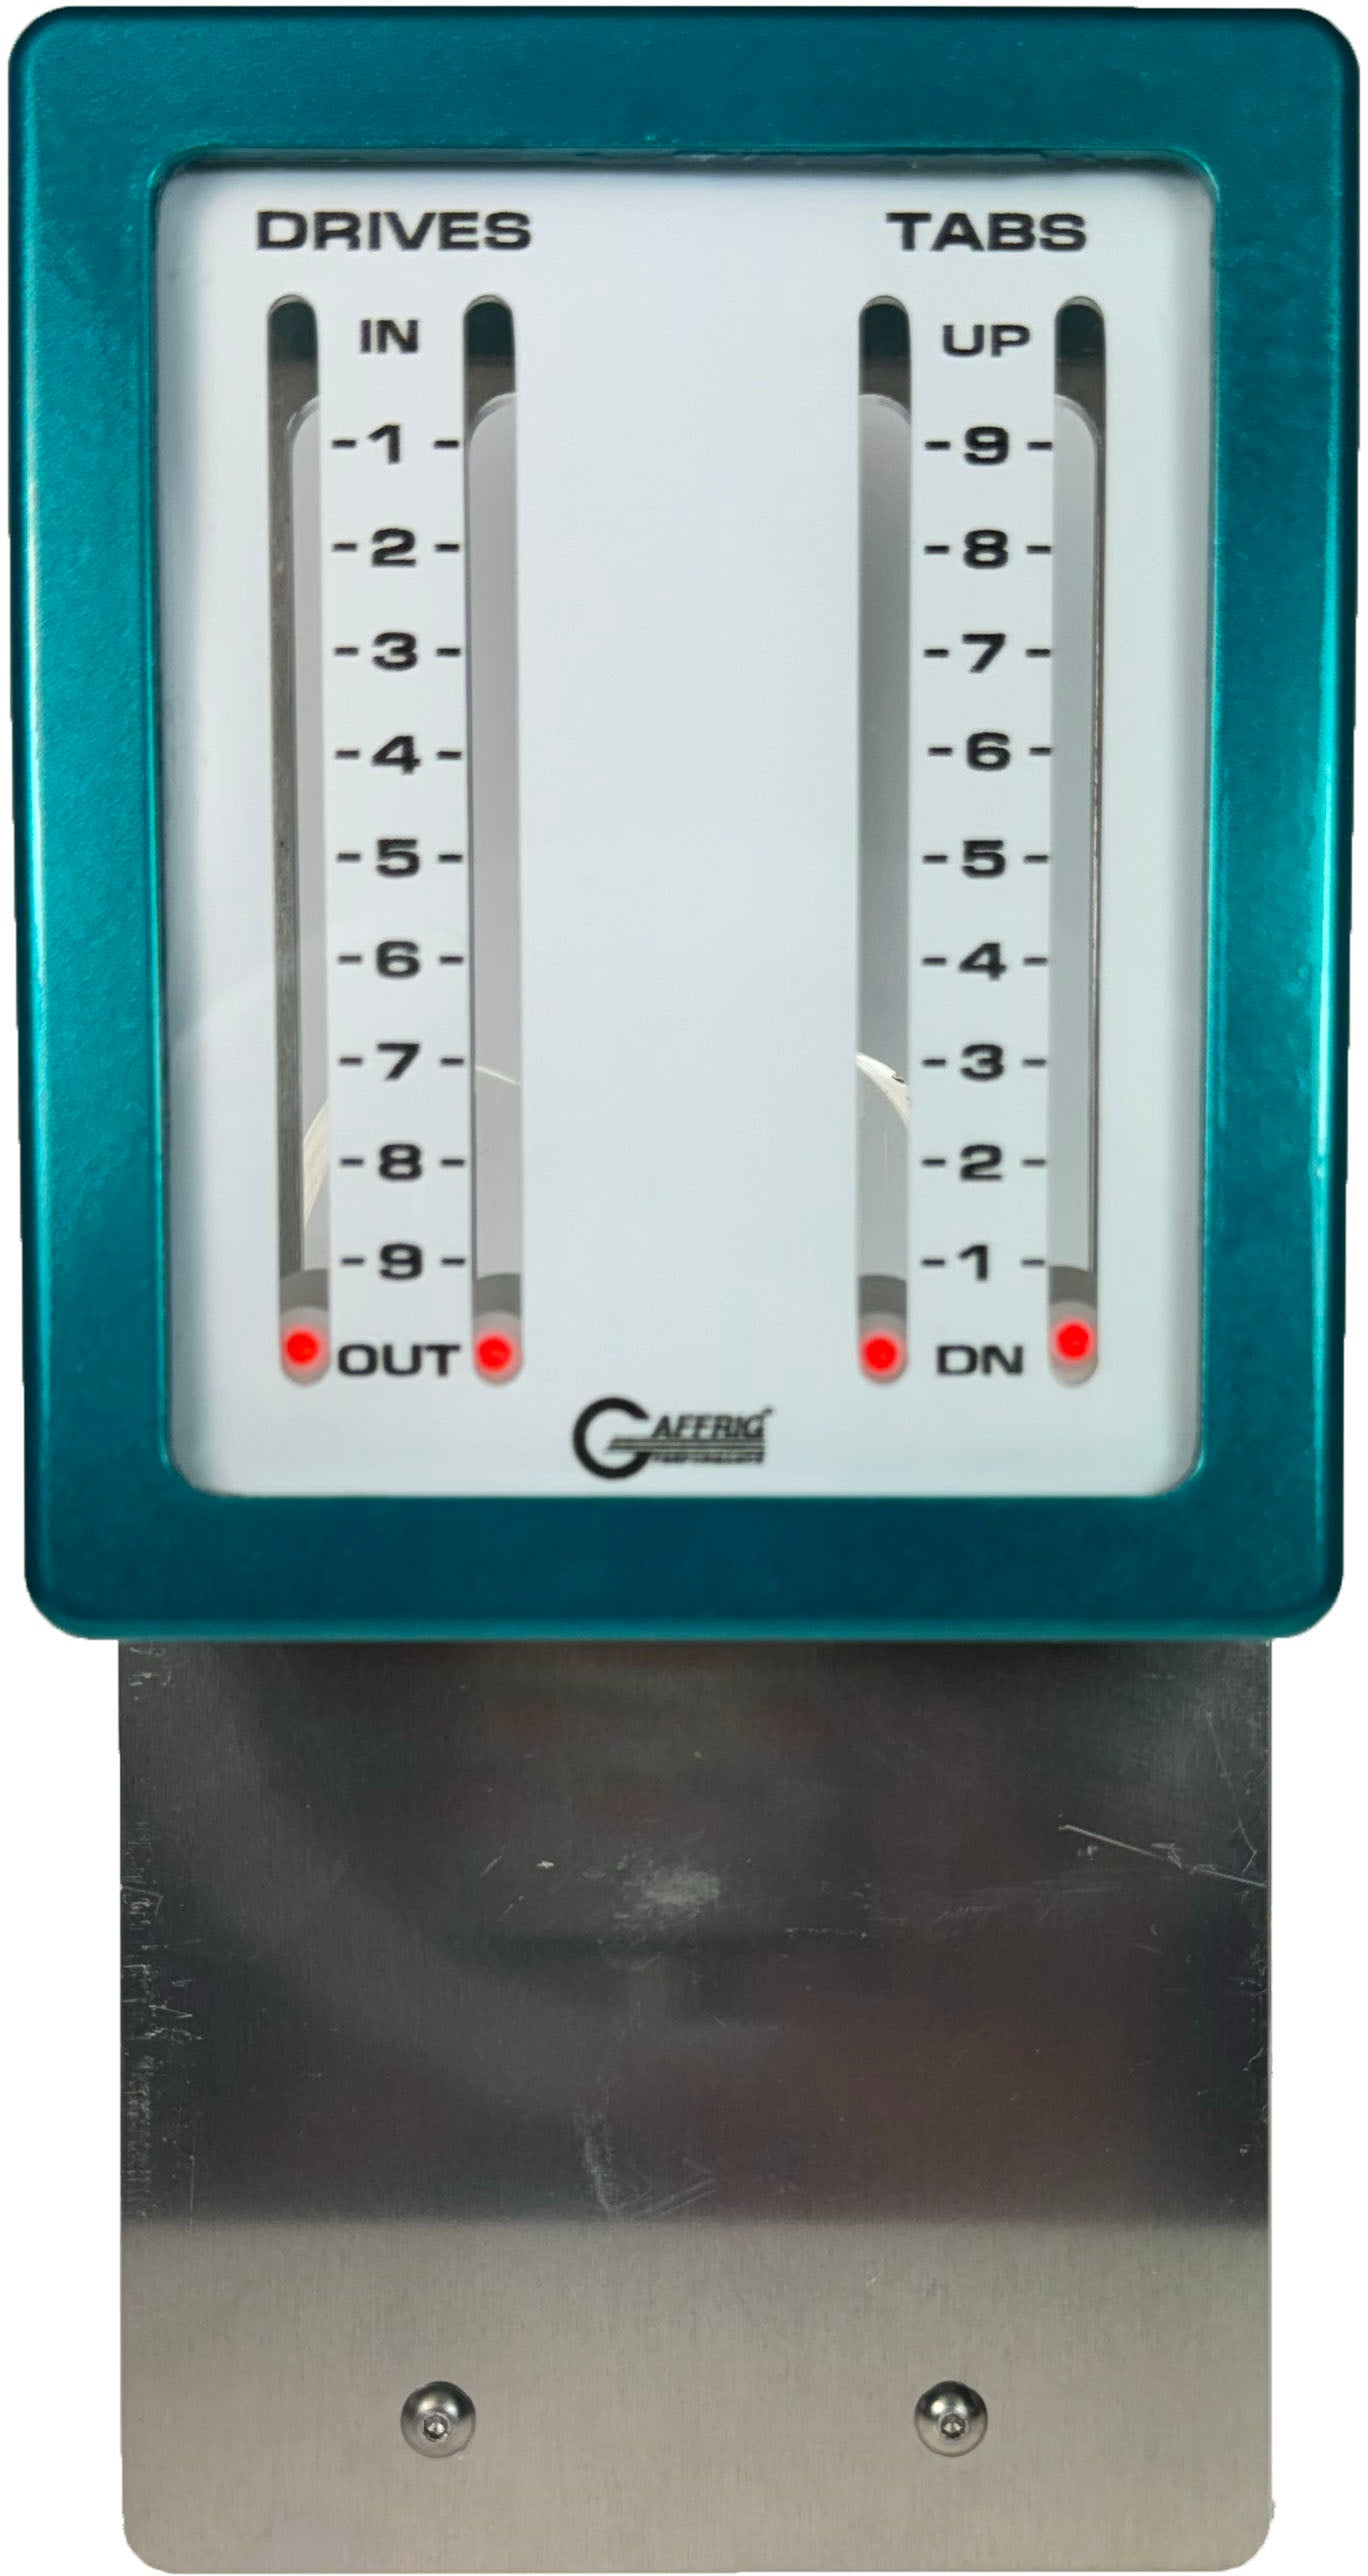 GAFFRIG PART #205 MECHANICAL INDICATOR, 2 DRIVES/2 TABS, MERCURY- CARD - WHITE DIAL TEAL